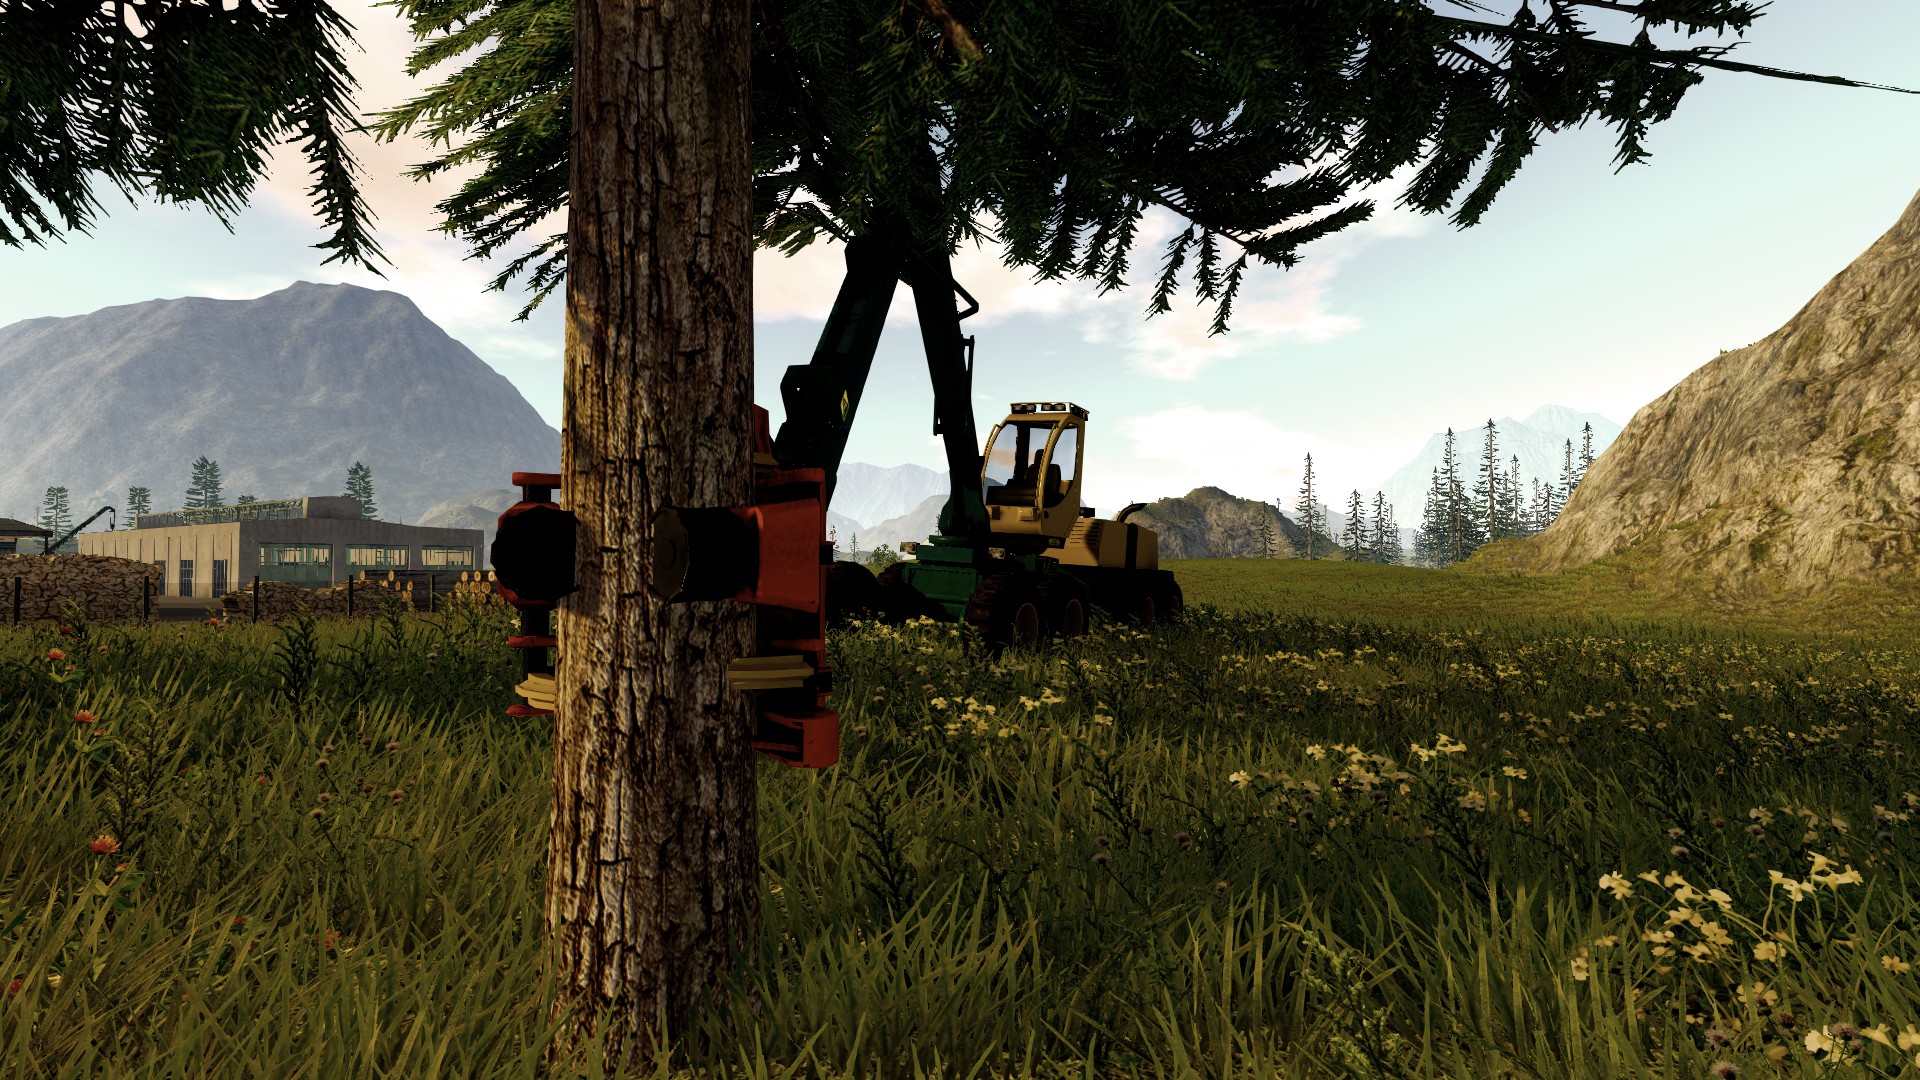 Forestry 2017: The Simulation - screenshot 8